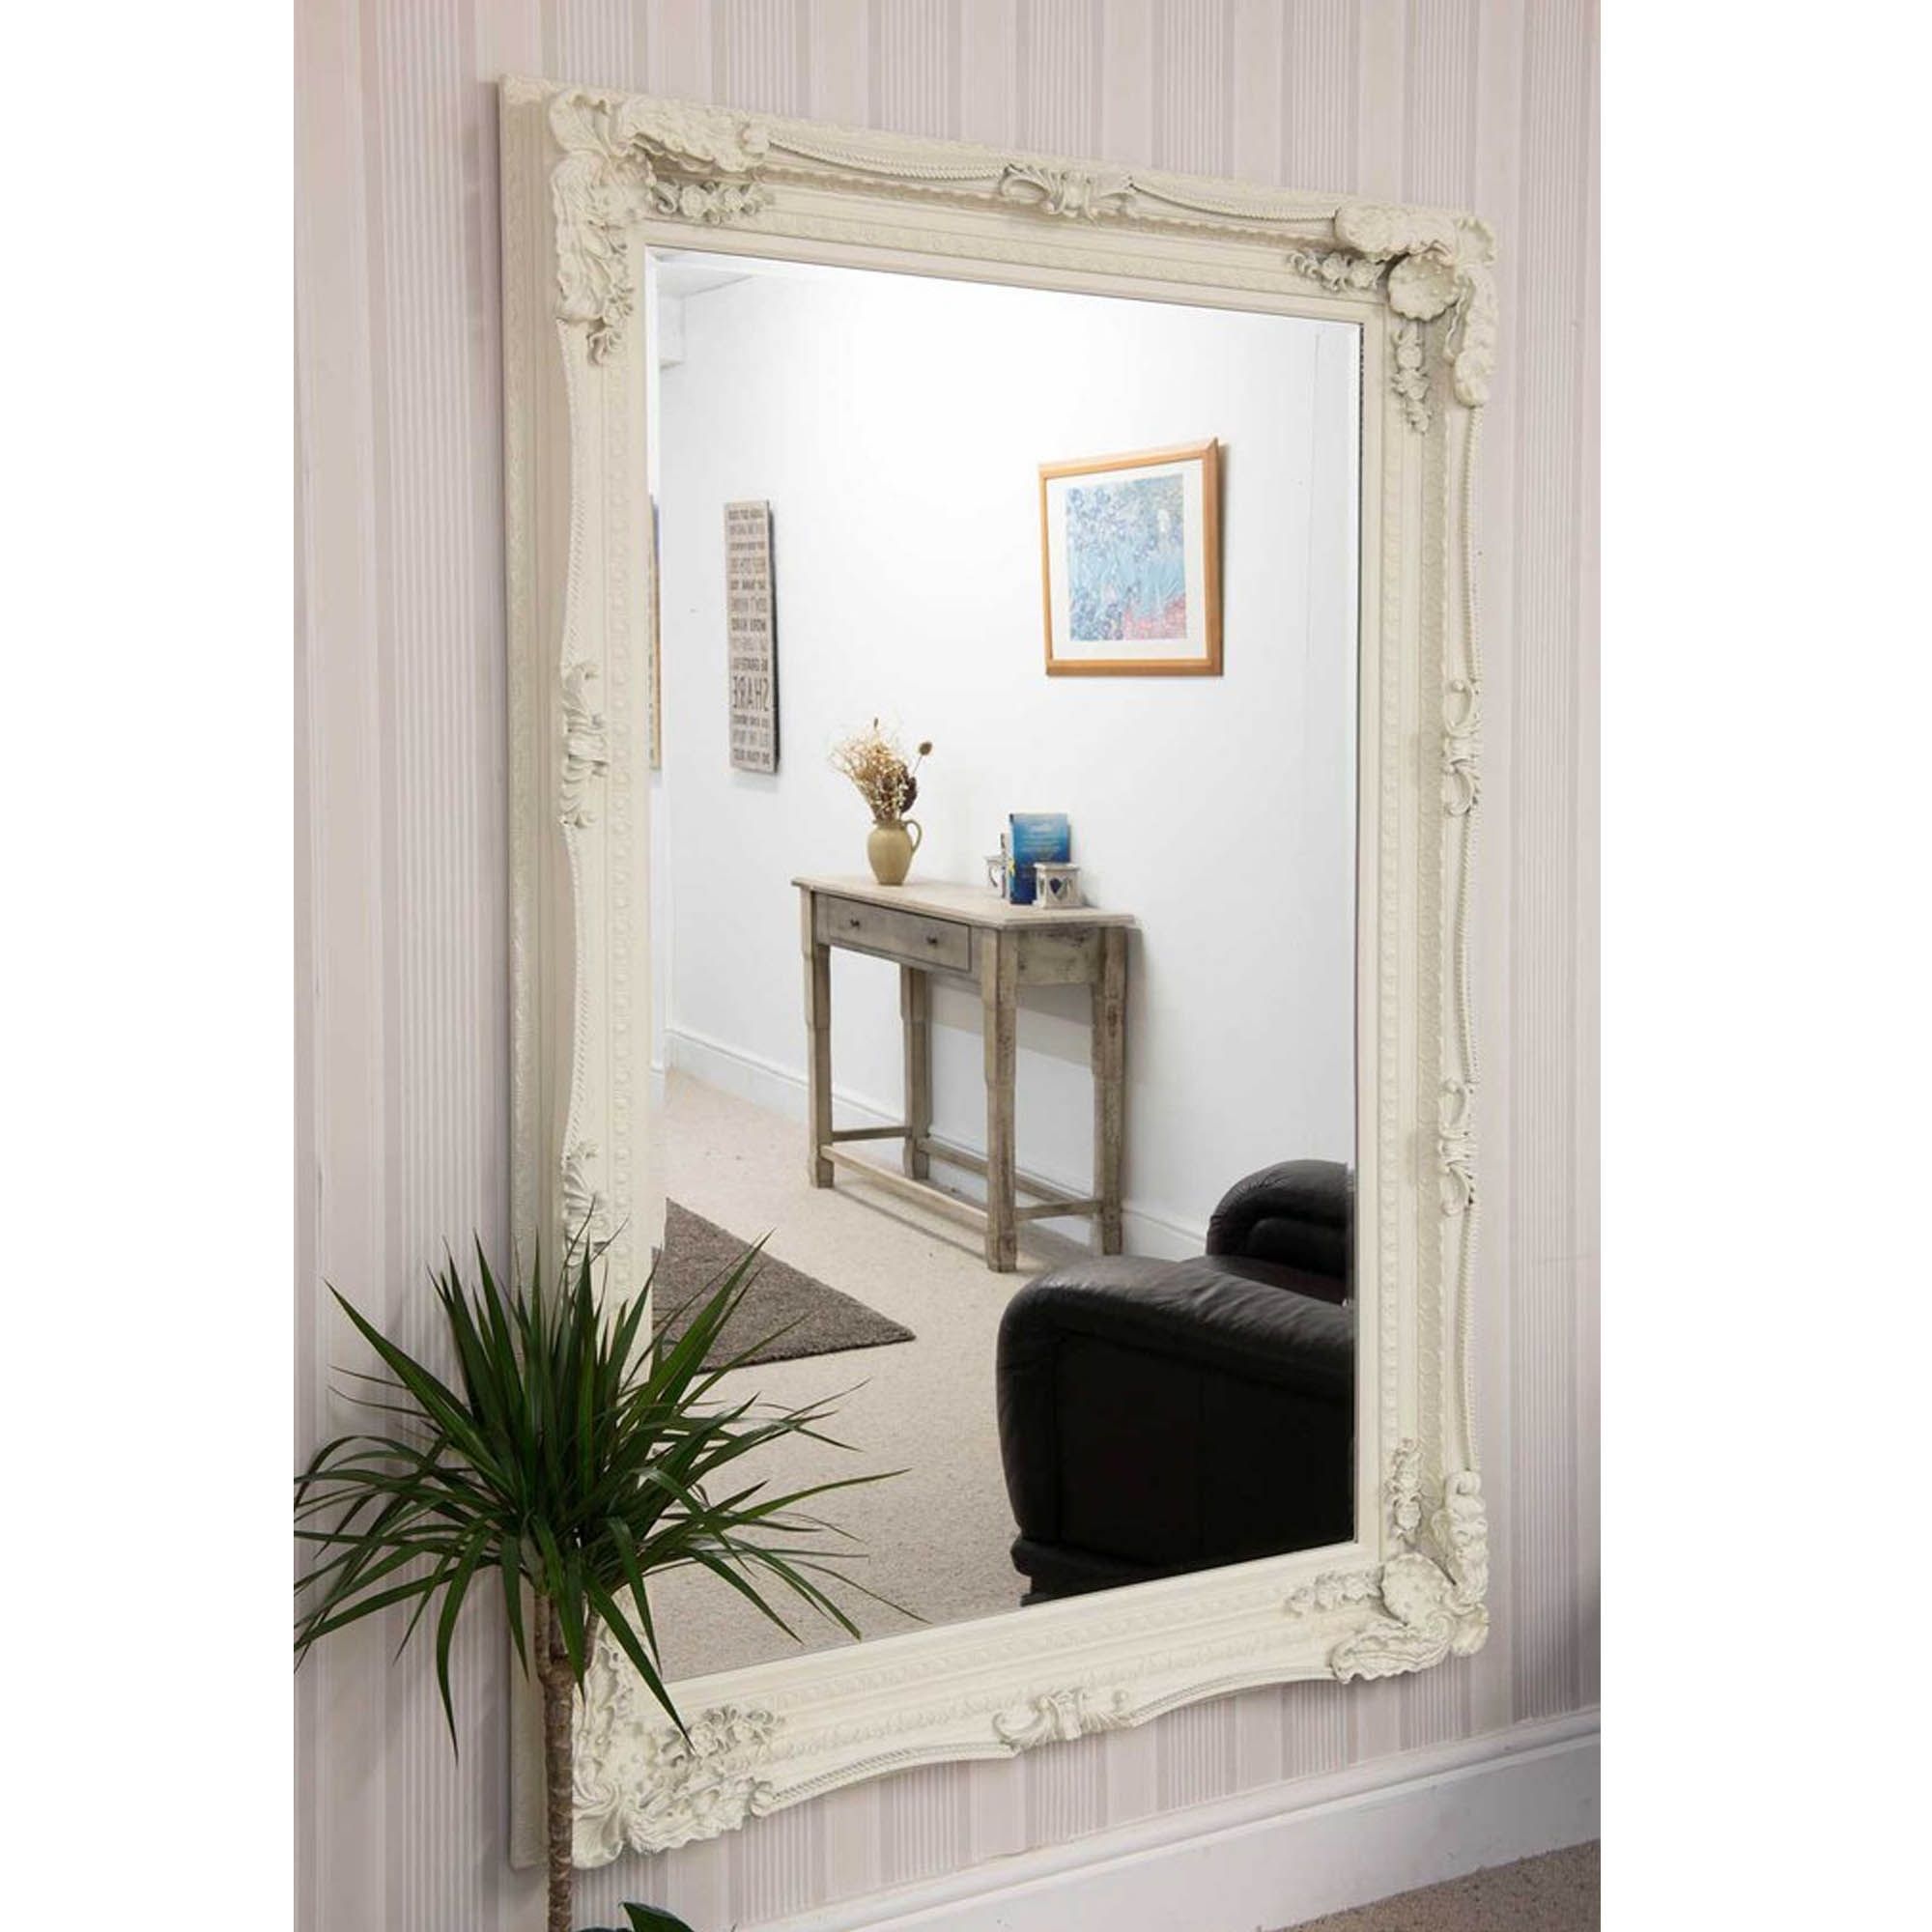 Carved Louis Antique French Style White Wall Mirror | Hd365 Inside White Wall Mirrors (View 6 of 15)